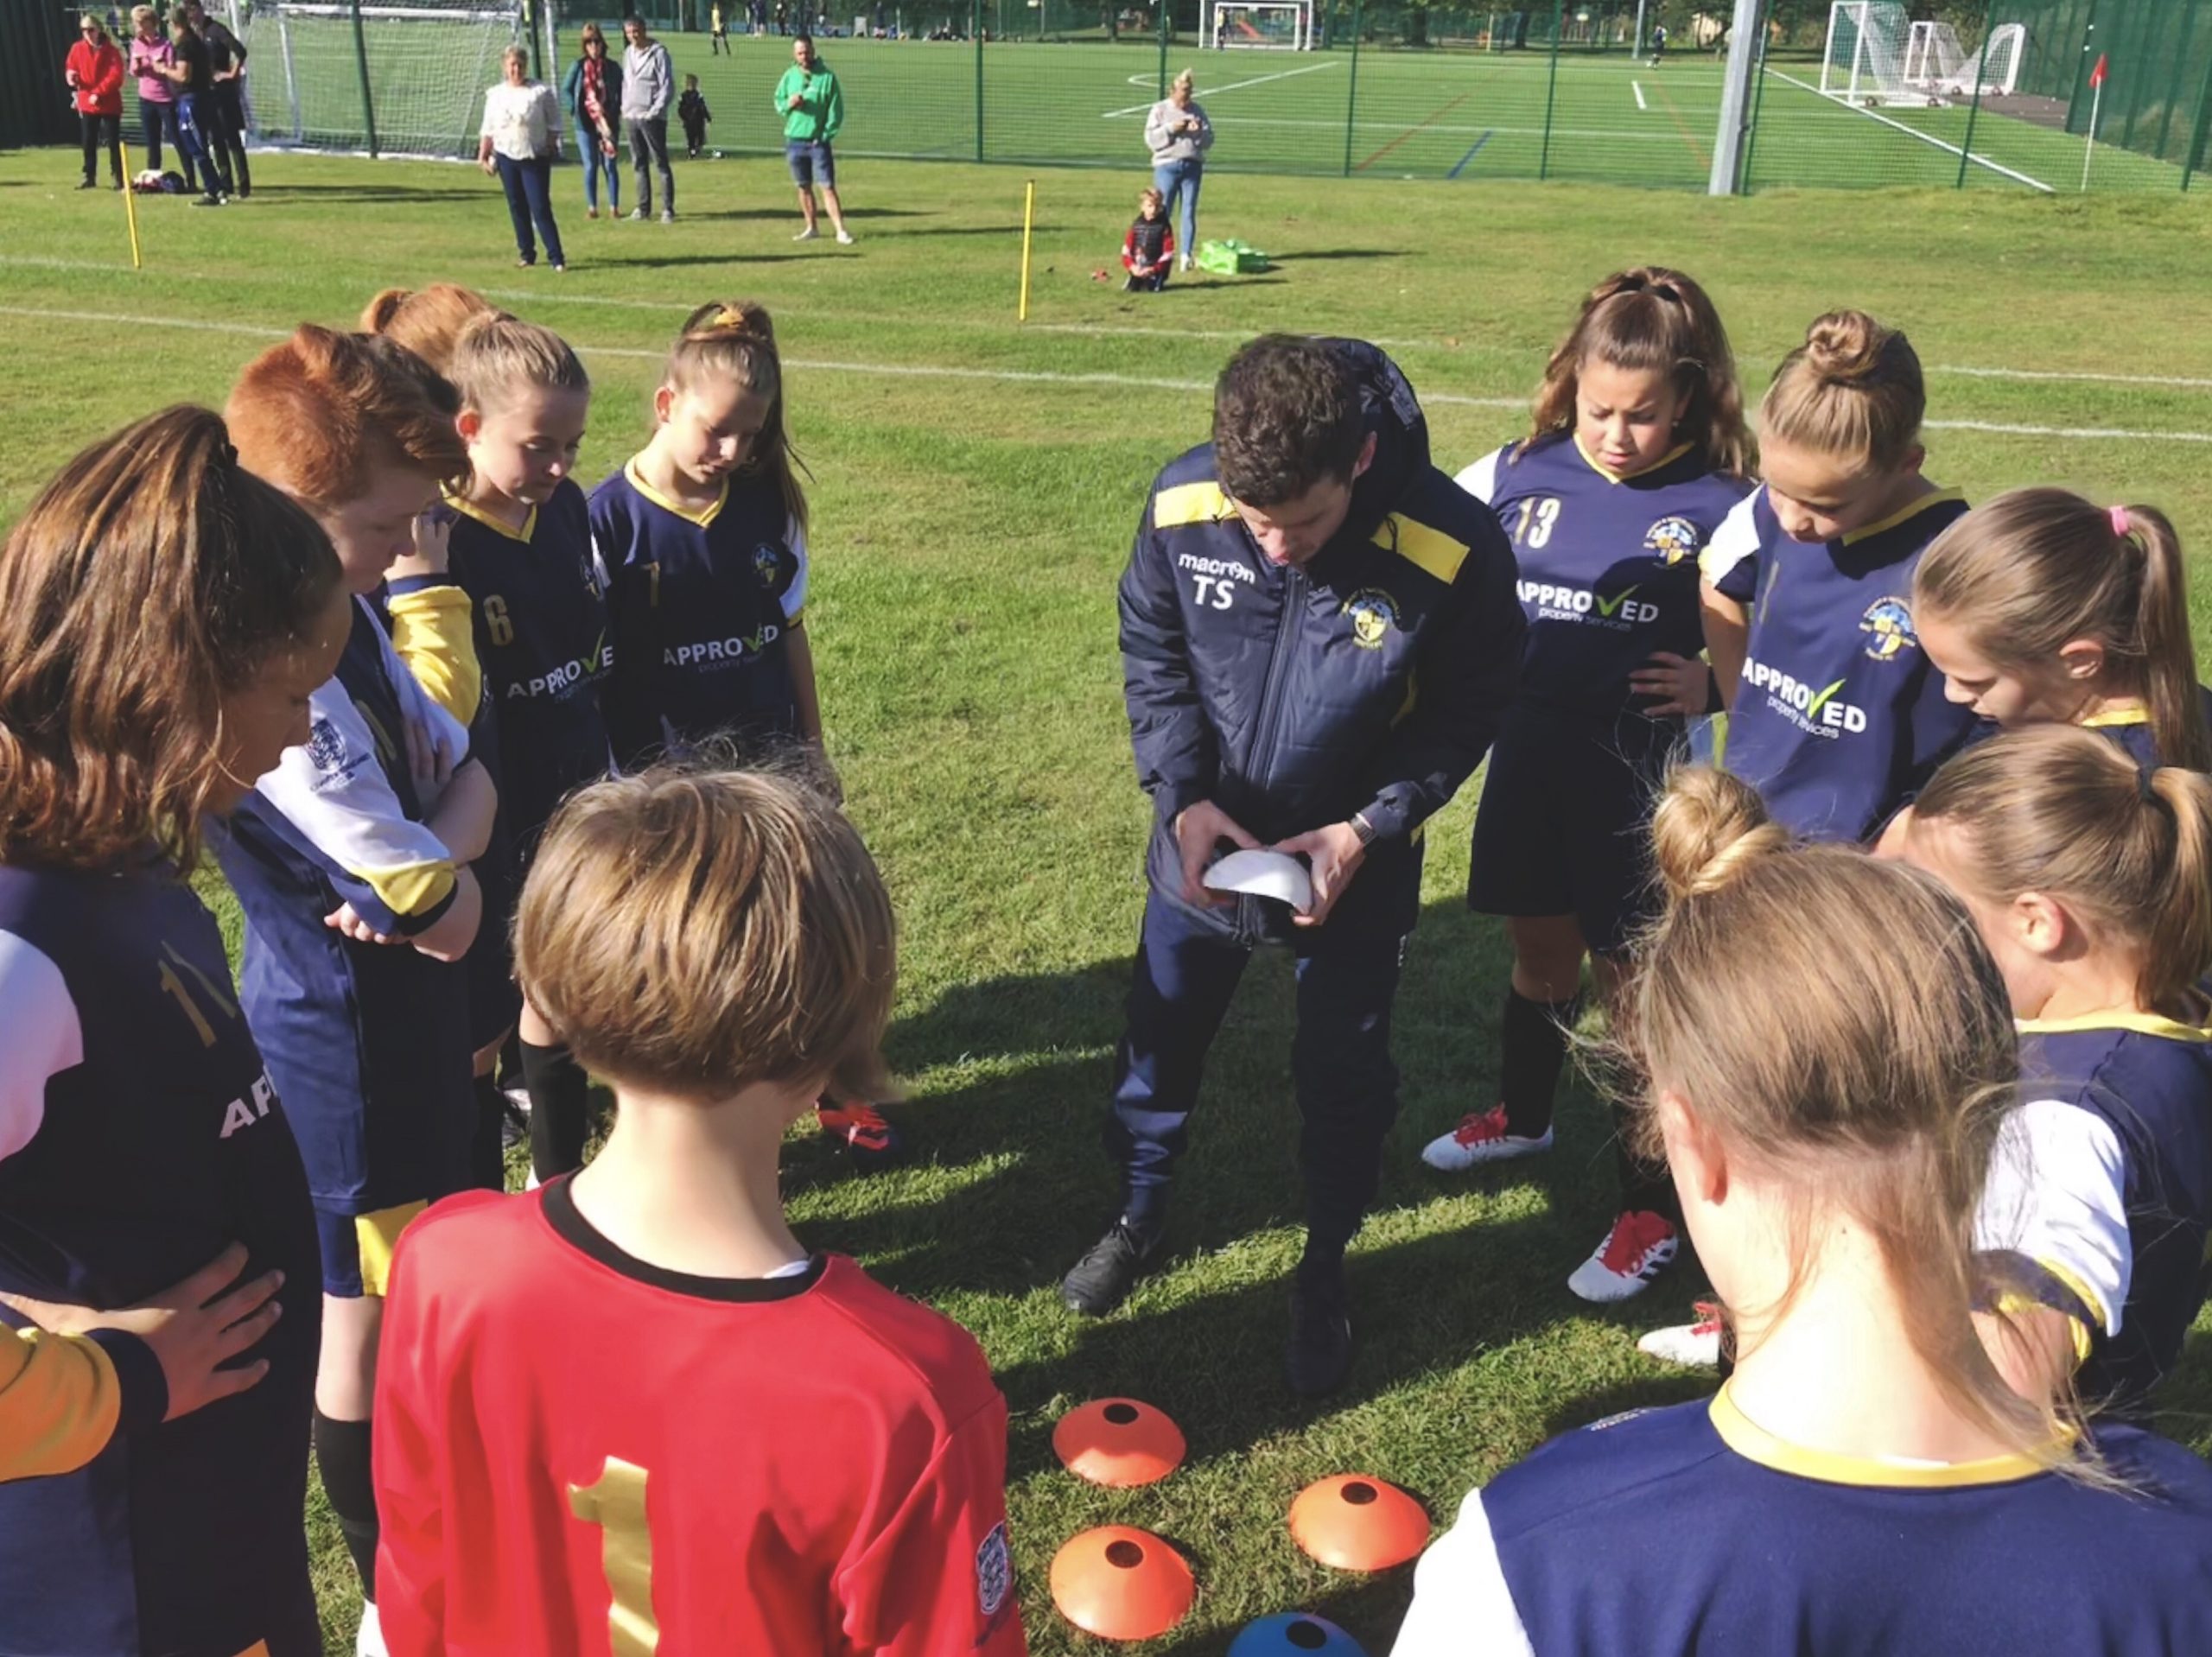 Thom Stone prepares the Havant & Waterlooville Girls for a match by demonstrating the formation they will be playing using cones.